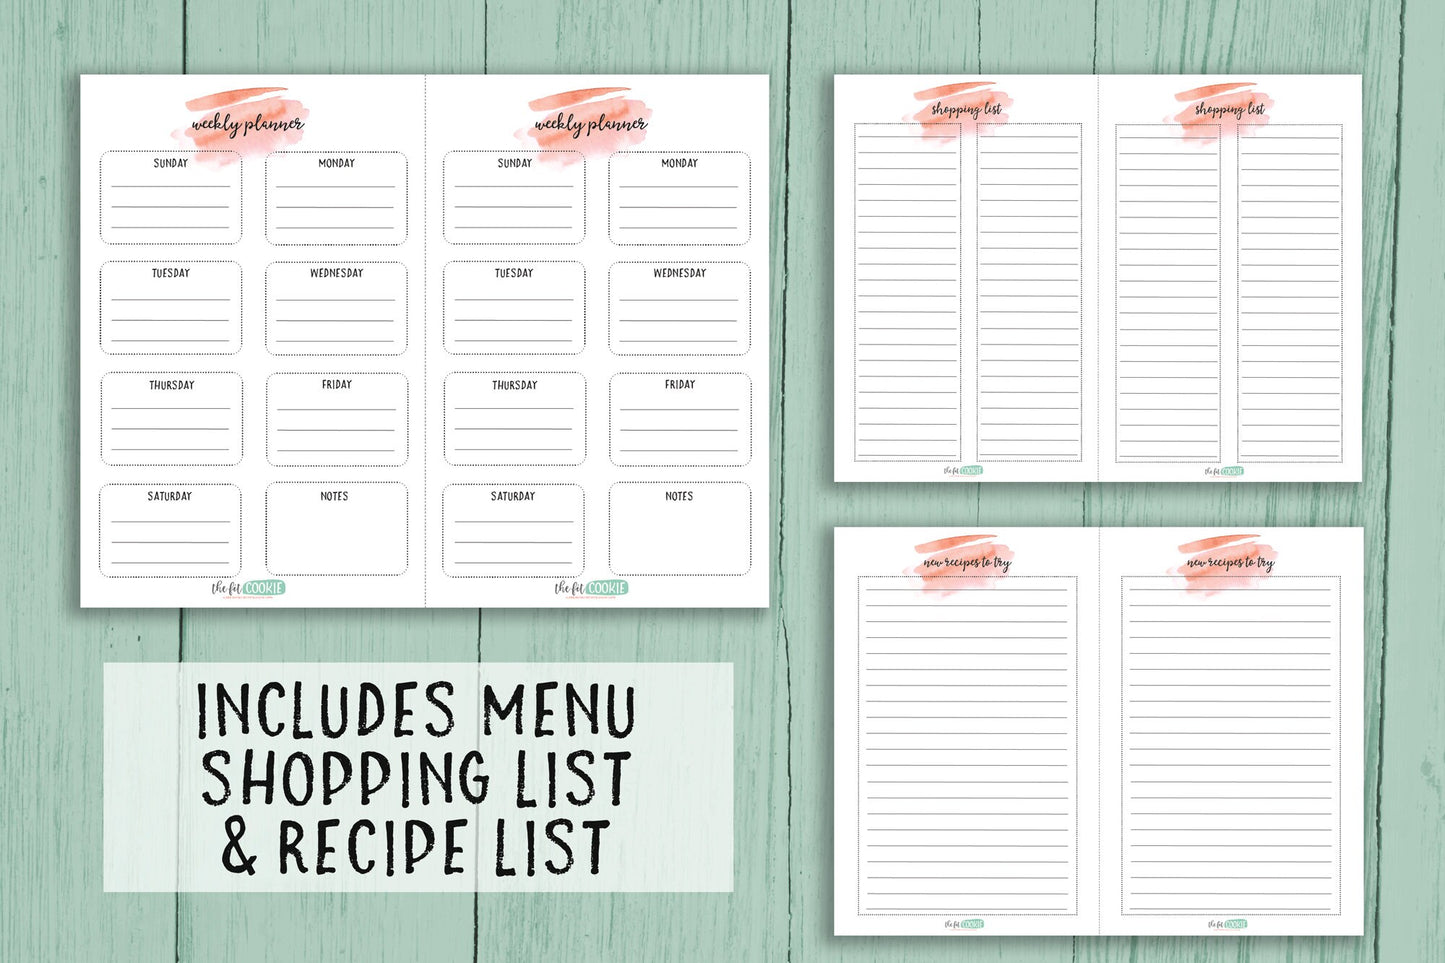 Compact Meal Planner